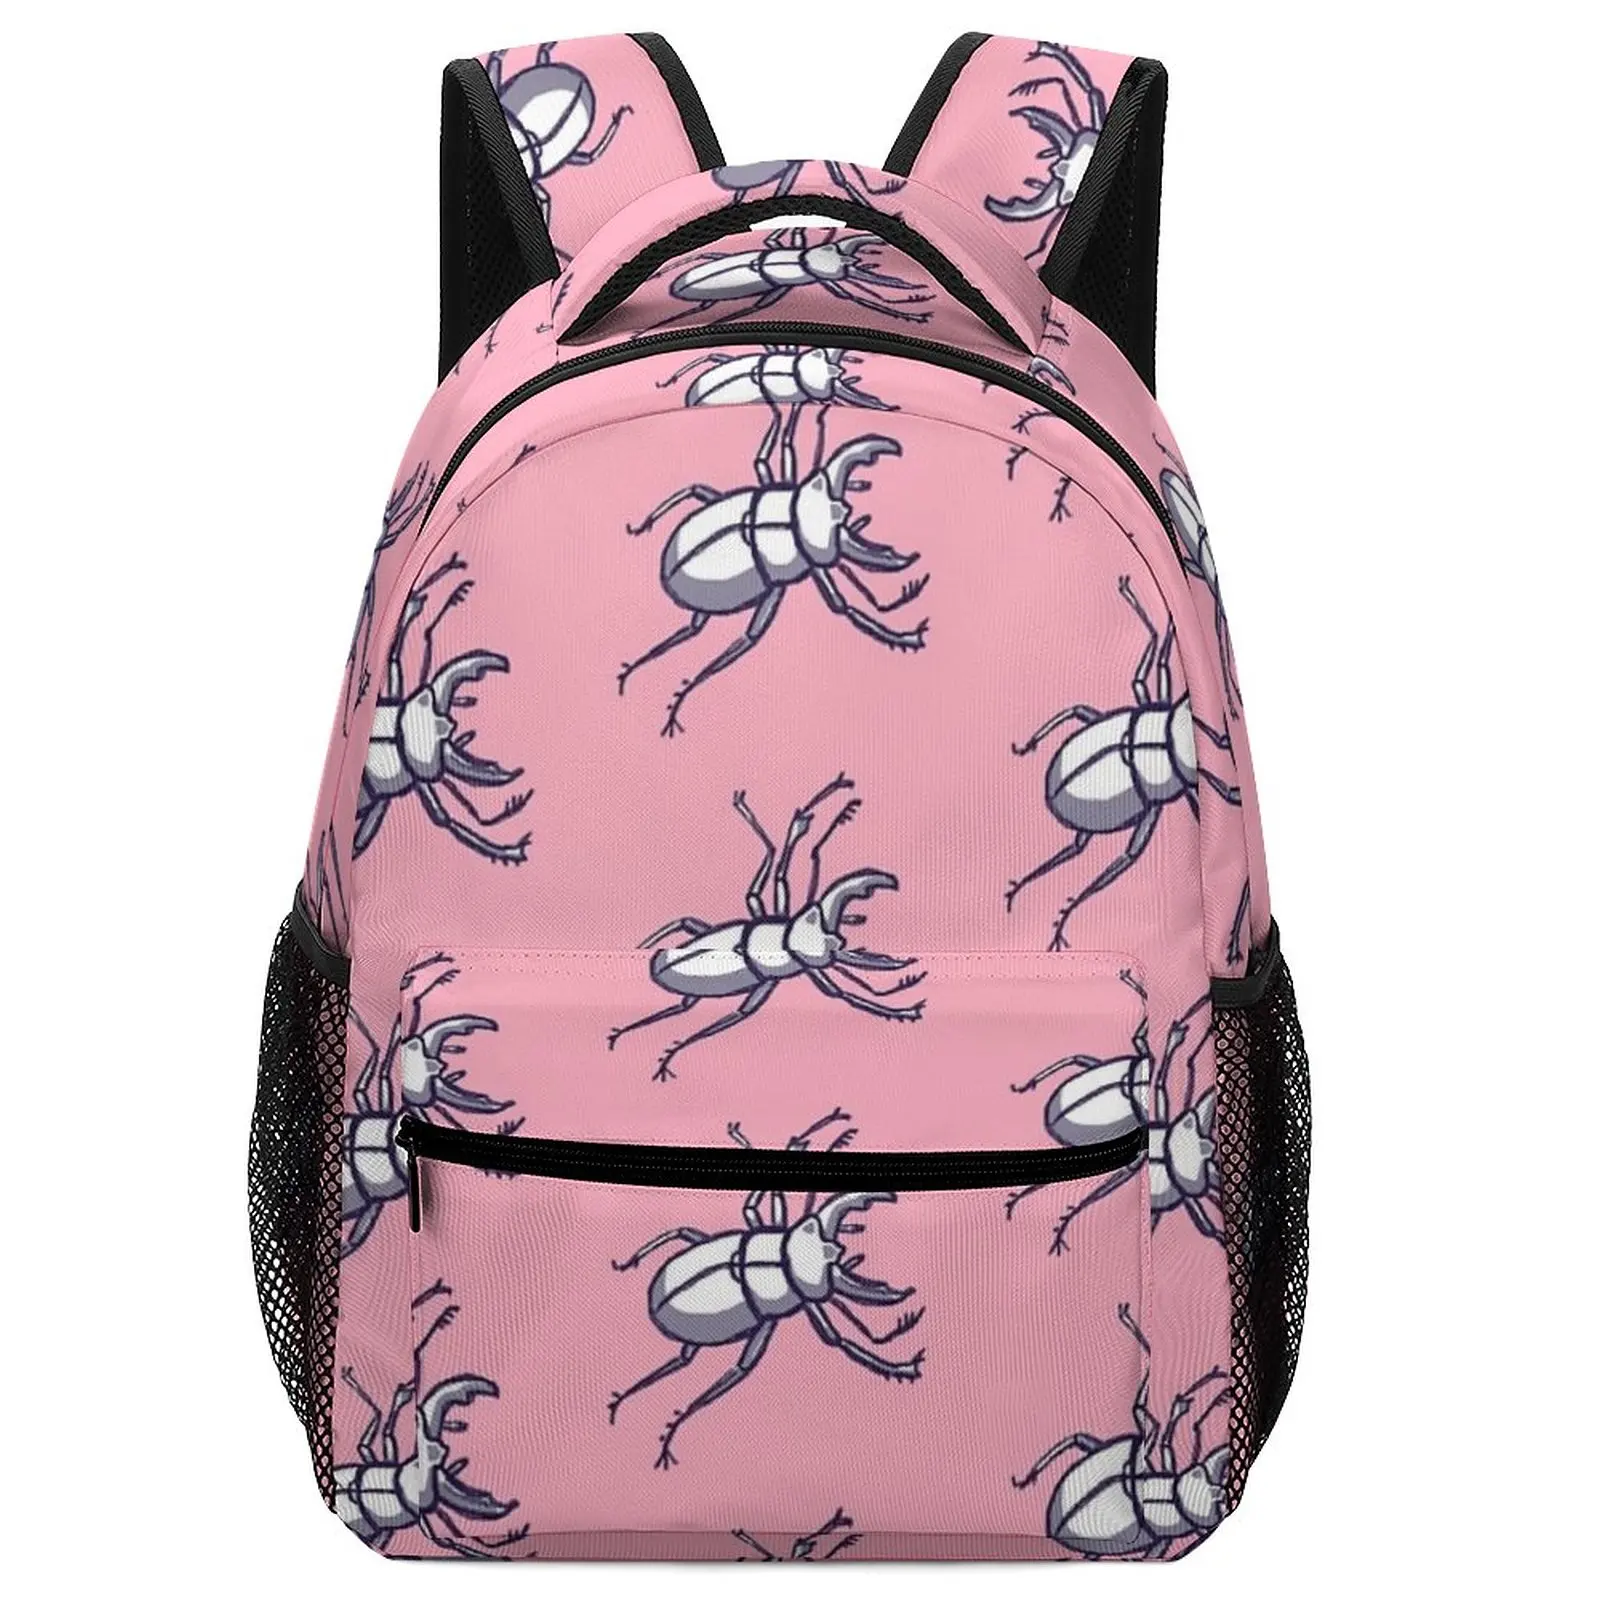 2022 Fun Clumsy  Child Insulated Backpack for Student Kids Teen School Bags Backpack For Middle School